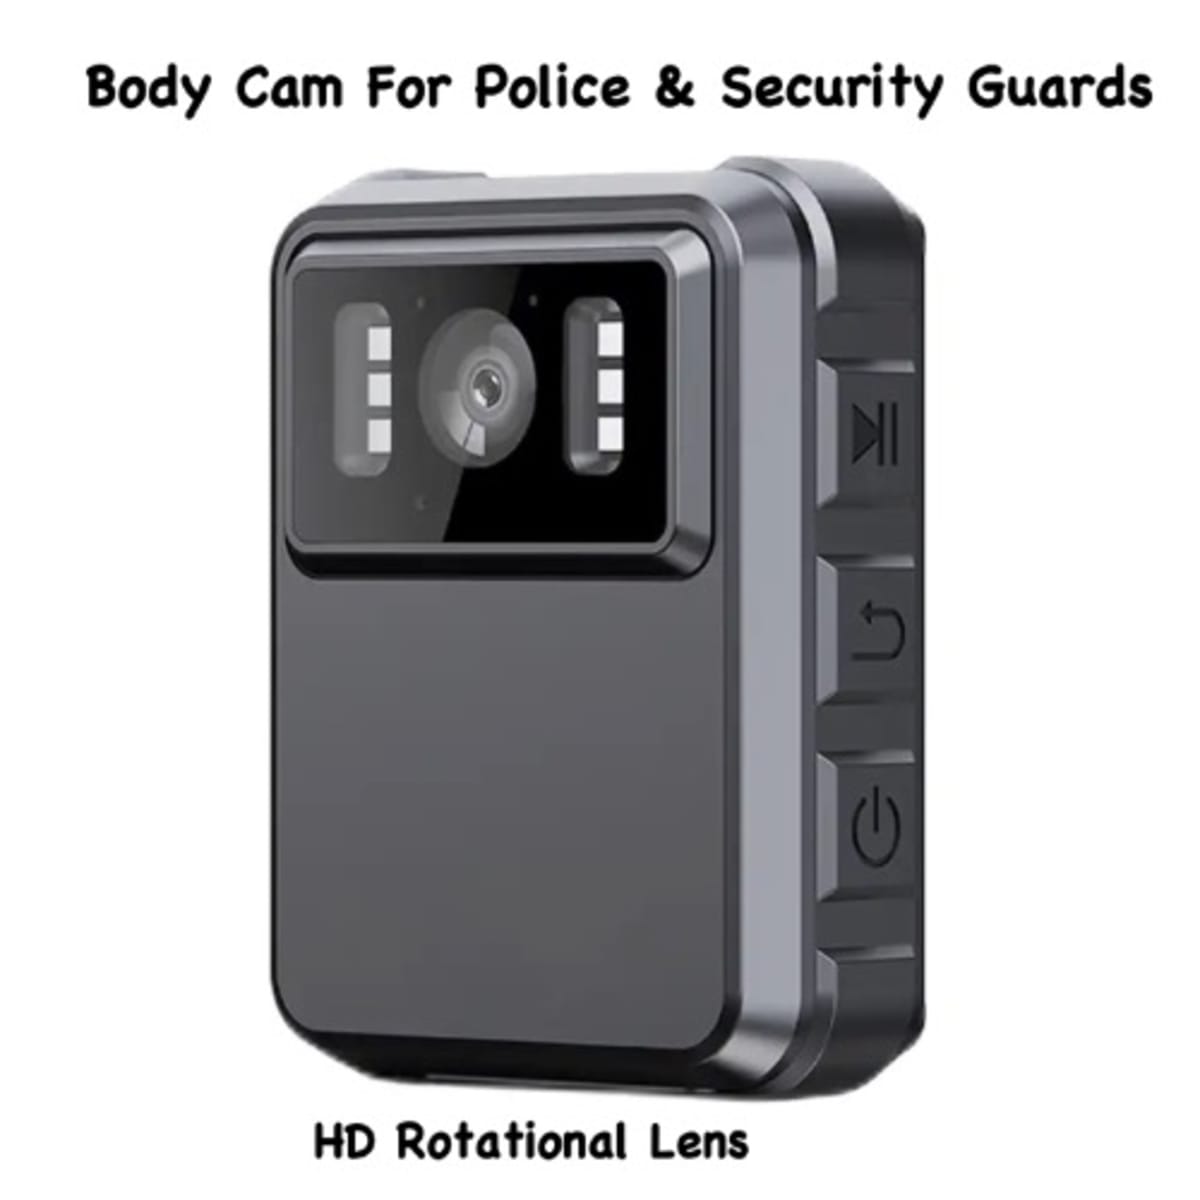 Vandallion Body Cam For Police And Security Guards